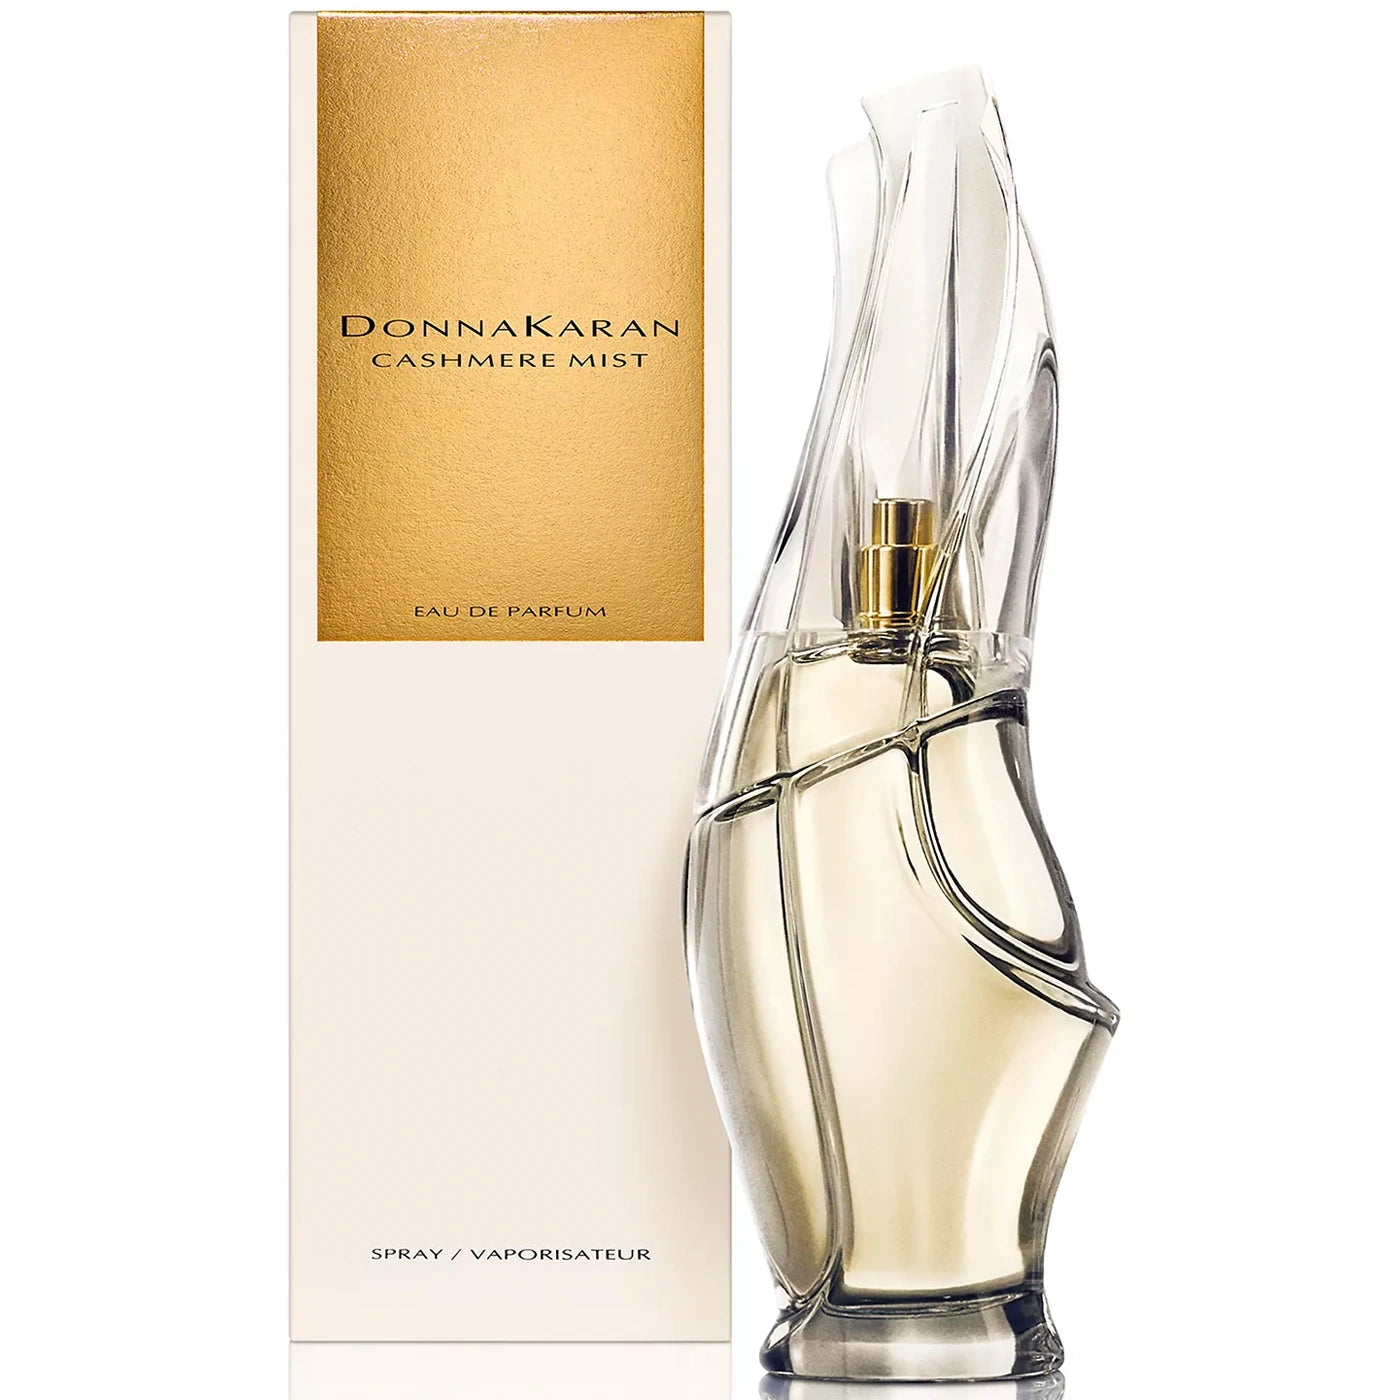 <p>Launched by the design house of Donna Karan in 1994,CASHMERE MIST is classified as a refreshing,woody,arid fragrance. This feminine scent possesses a blend of fresh floral jasmine,scents of sandalwood &amp; vanilla.</p> <p><strong>Recommended Use</strong> Daytime</p>